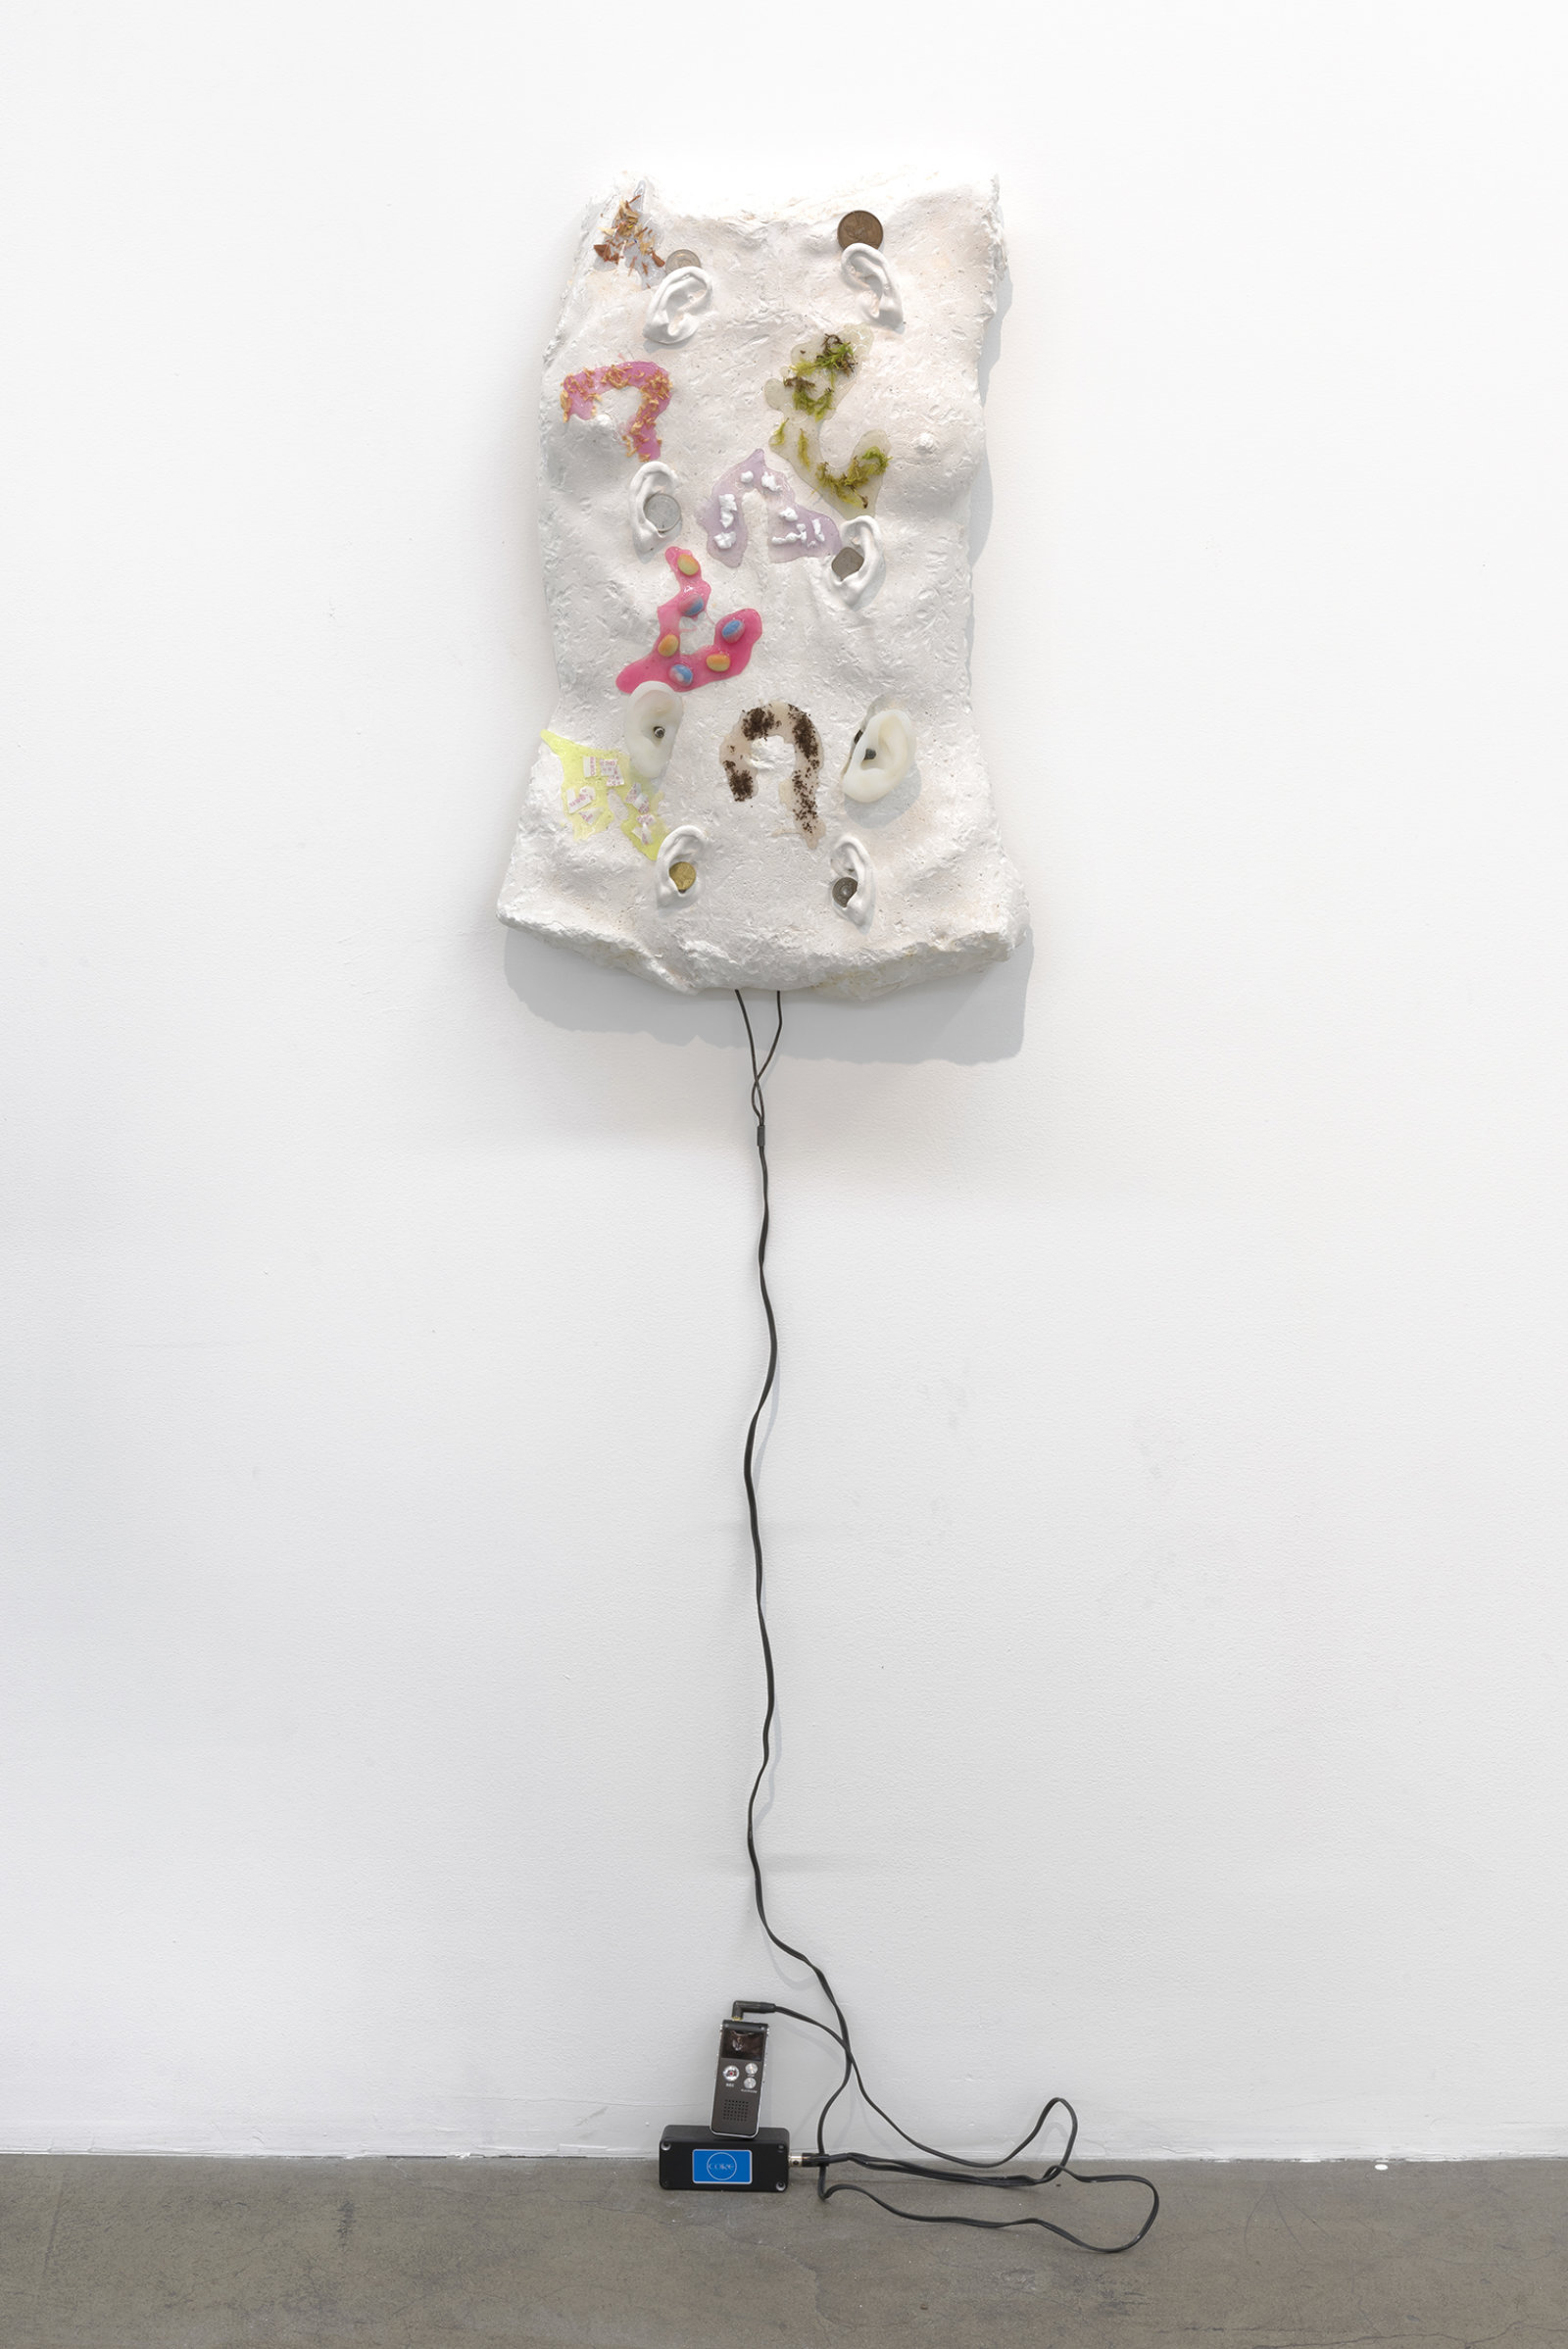 Kasper Feyrer, Sick Muses (ears), 2015, plaster, silicon, mixed media, 21 x 14 x 4 in. (53 x 36 x 10 cm)